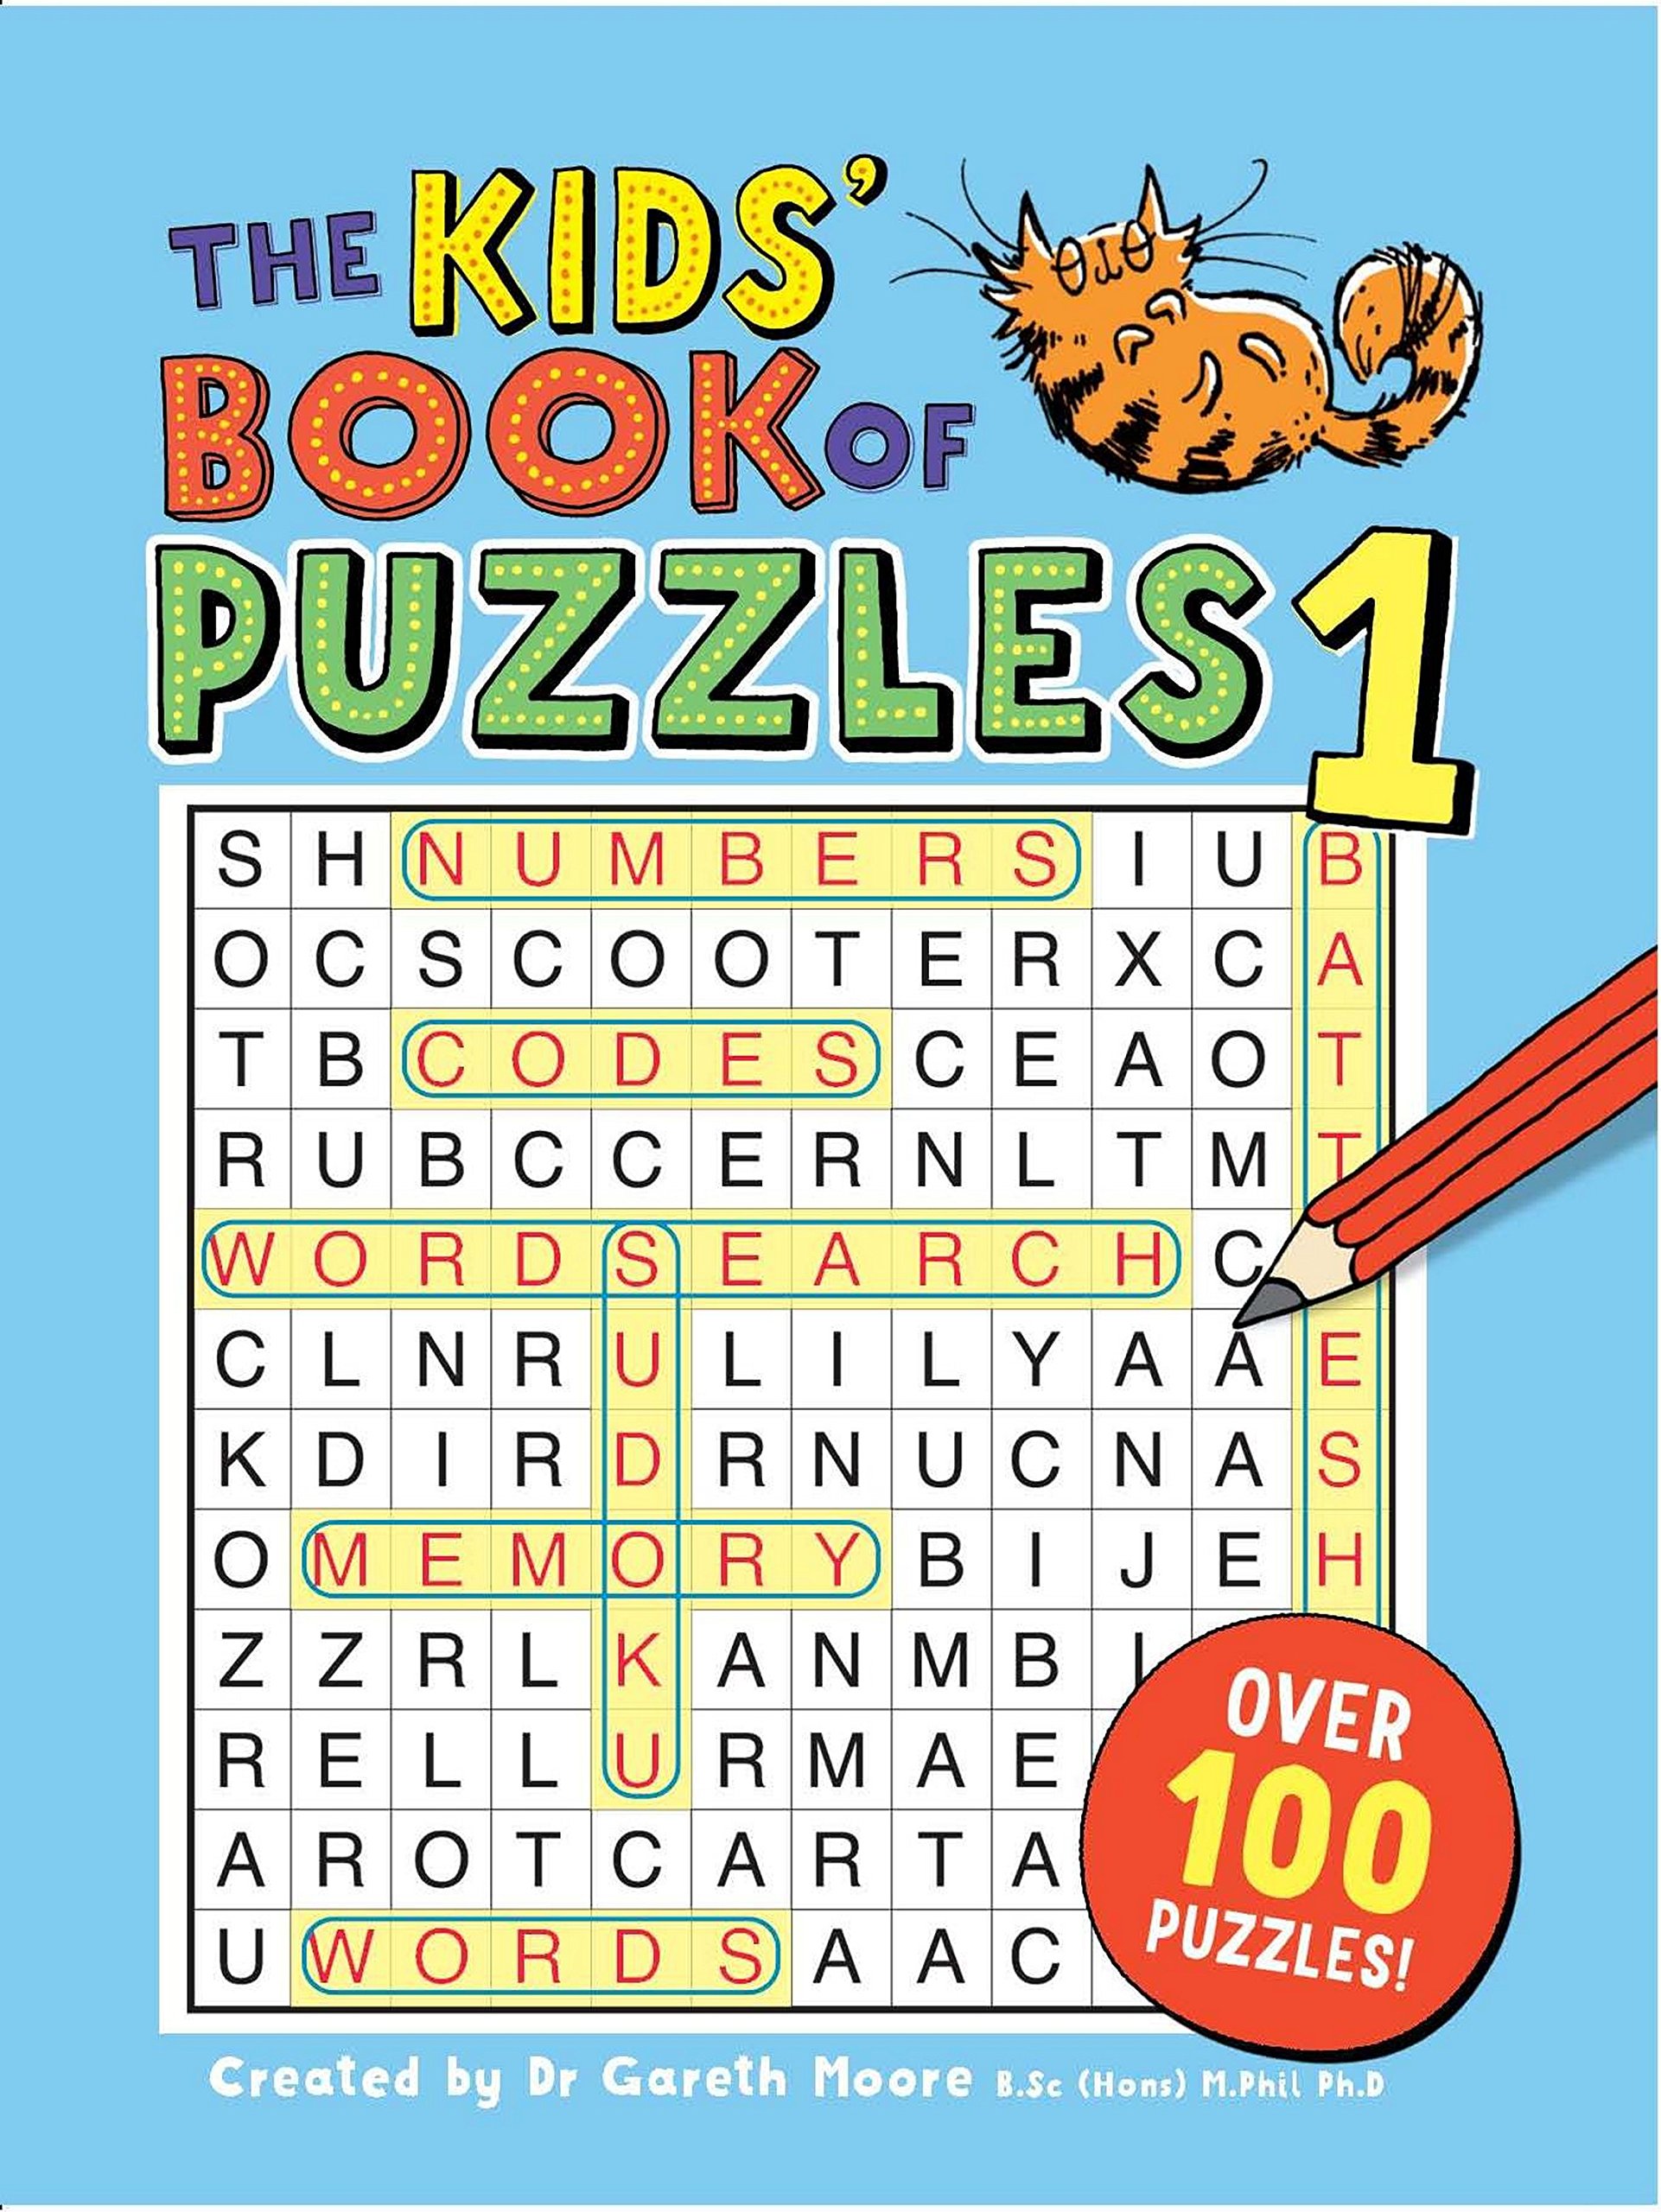 The Kids' Book of Puzzles